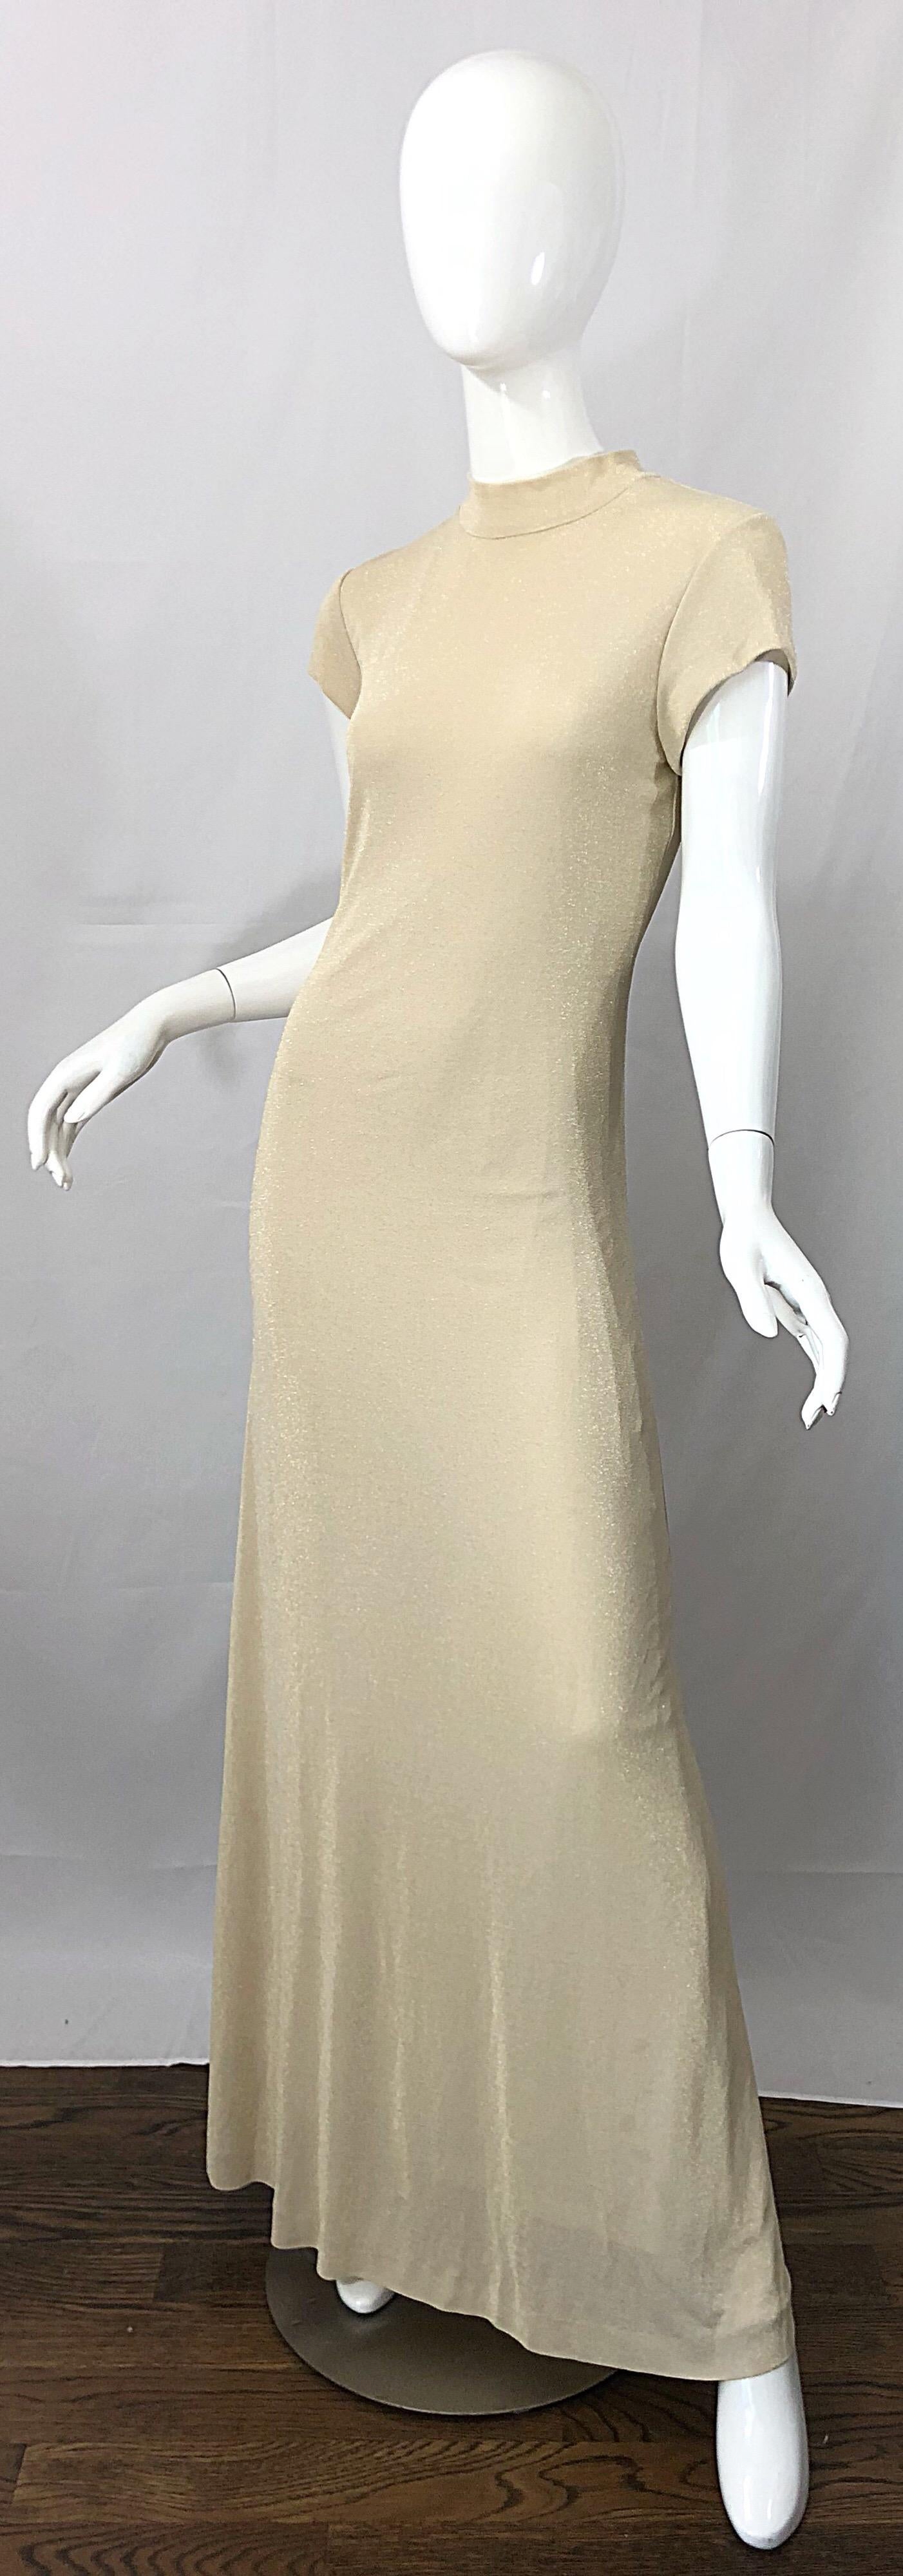 1990s Huey Waltzer Light Gold Metallic High Neck Short Sleeve 90s Jersey Gown In Excellent Condition For Sale In San Diego, CA